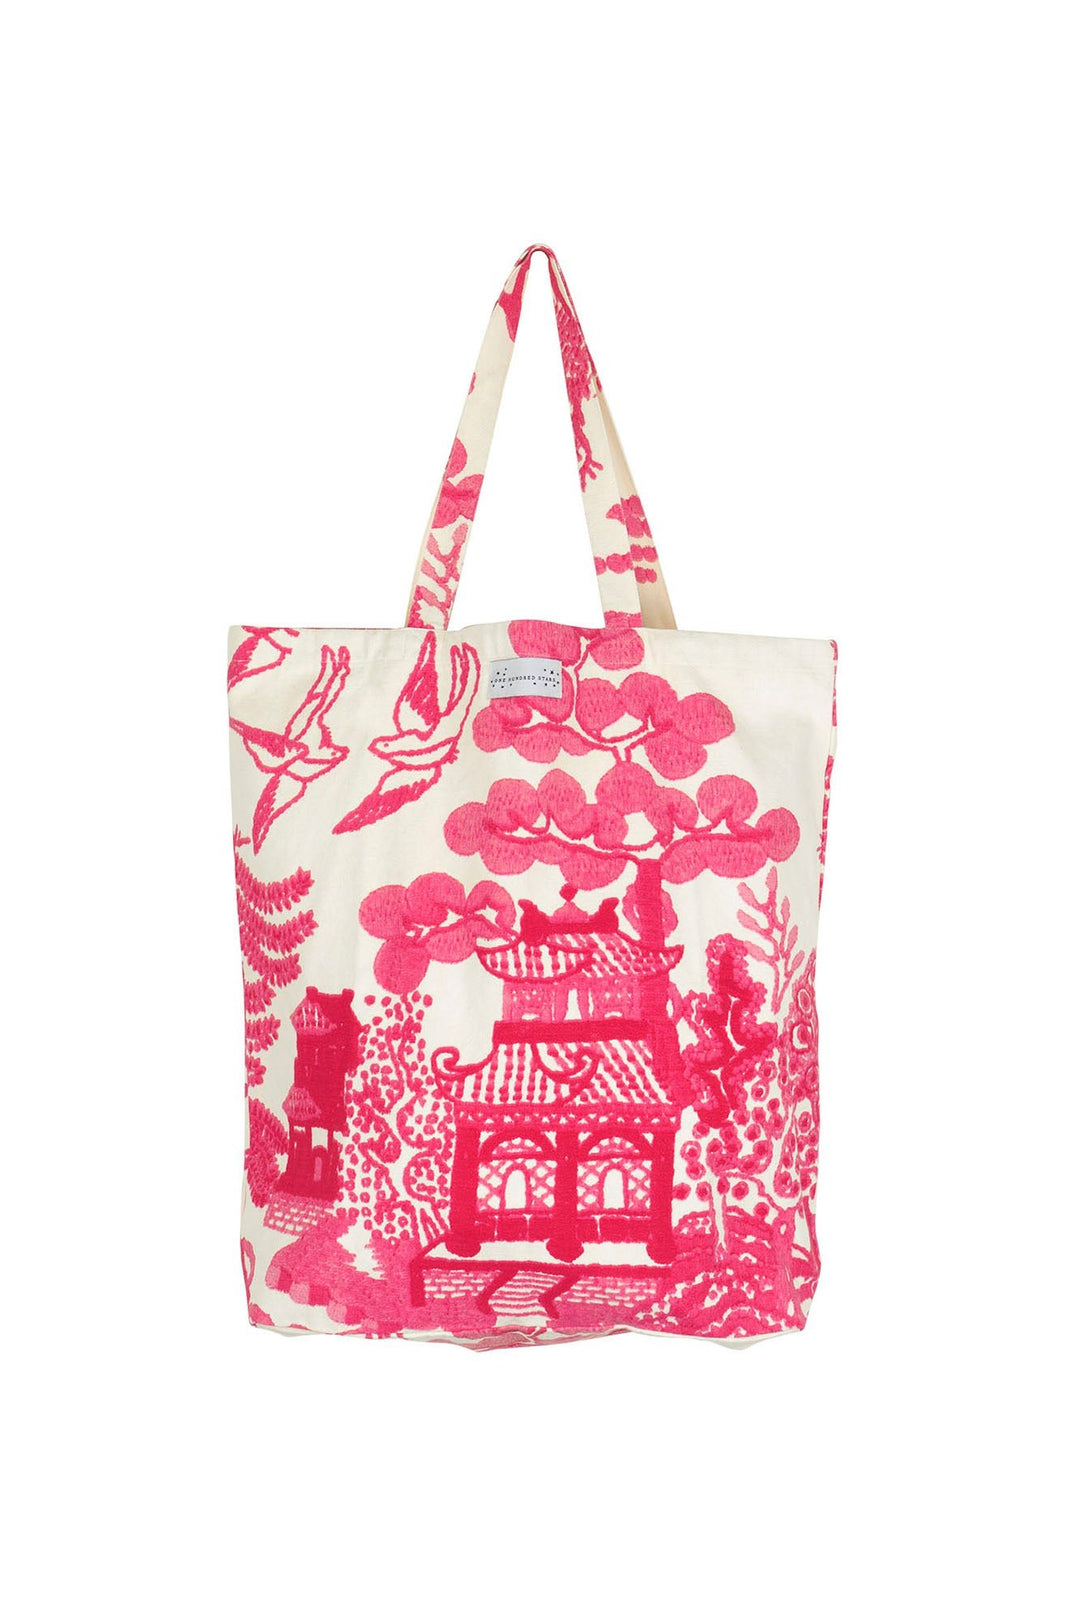 Giant Willow Fuchsia Pink Canvas Bag - One Hundred Stars